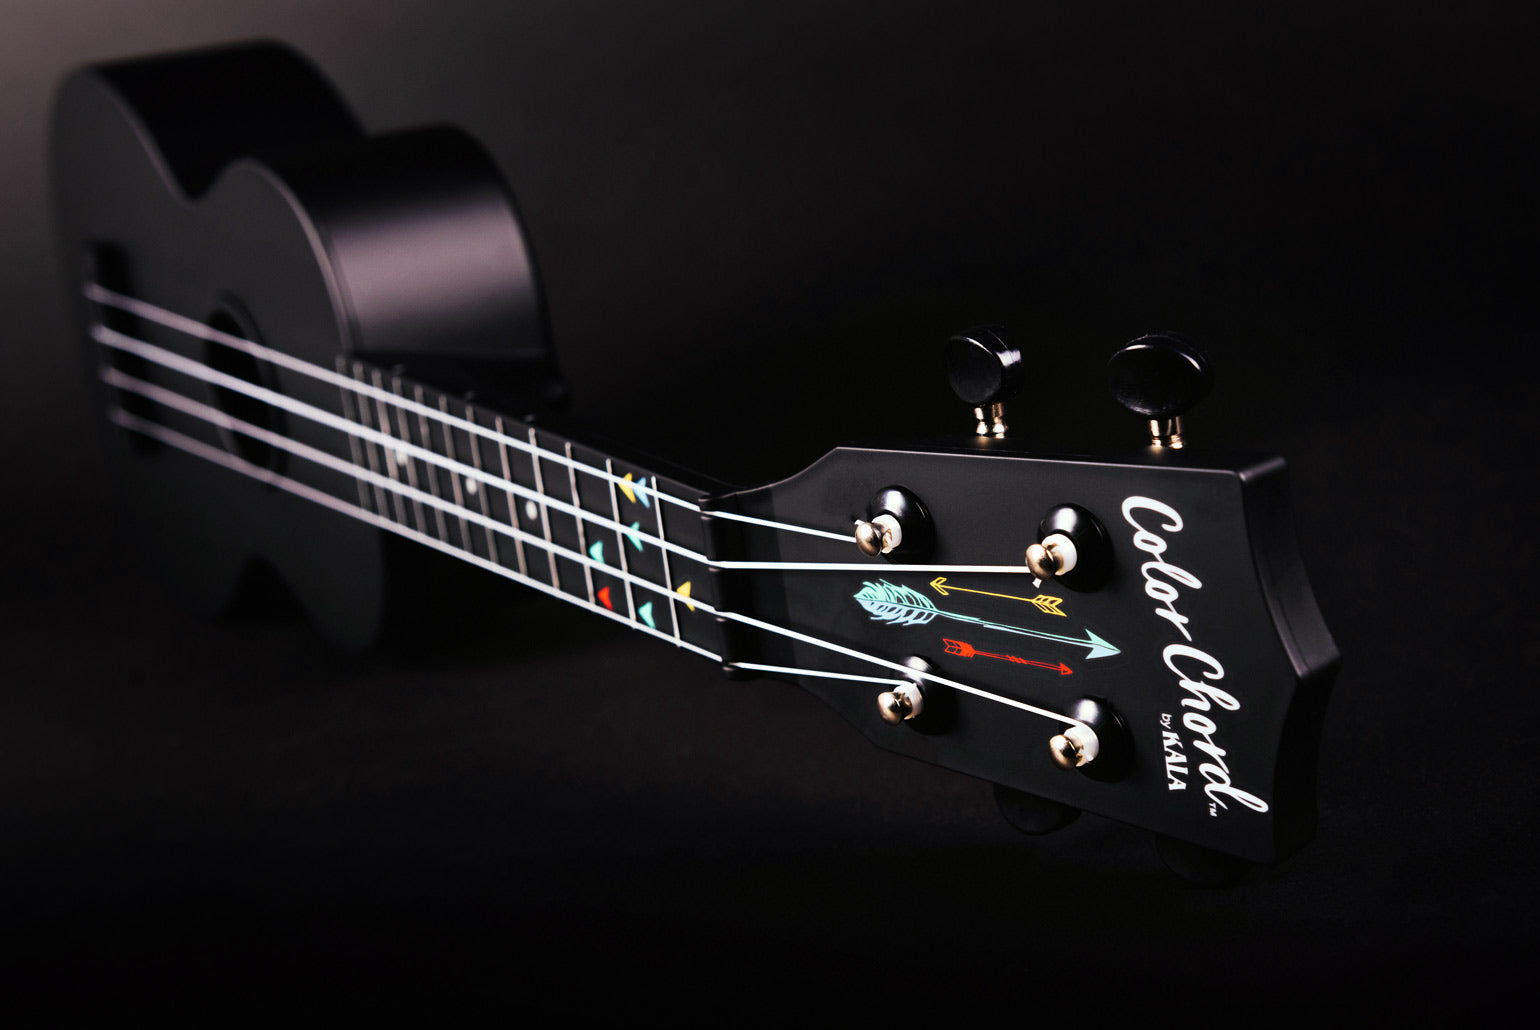 Kala Color Chord™ Ukulele long profile image with headstock with logo, tuners, strings, fretboard, and color-coded chord markers.